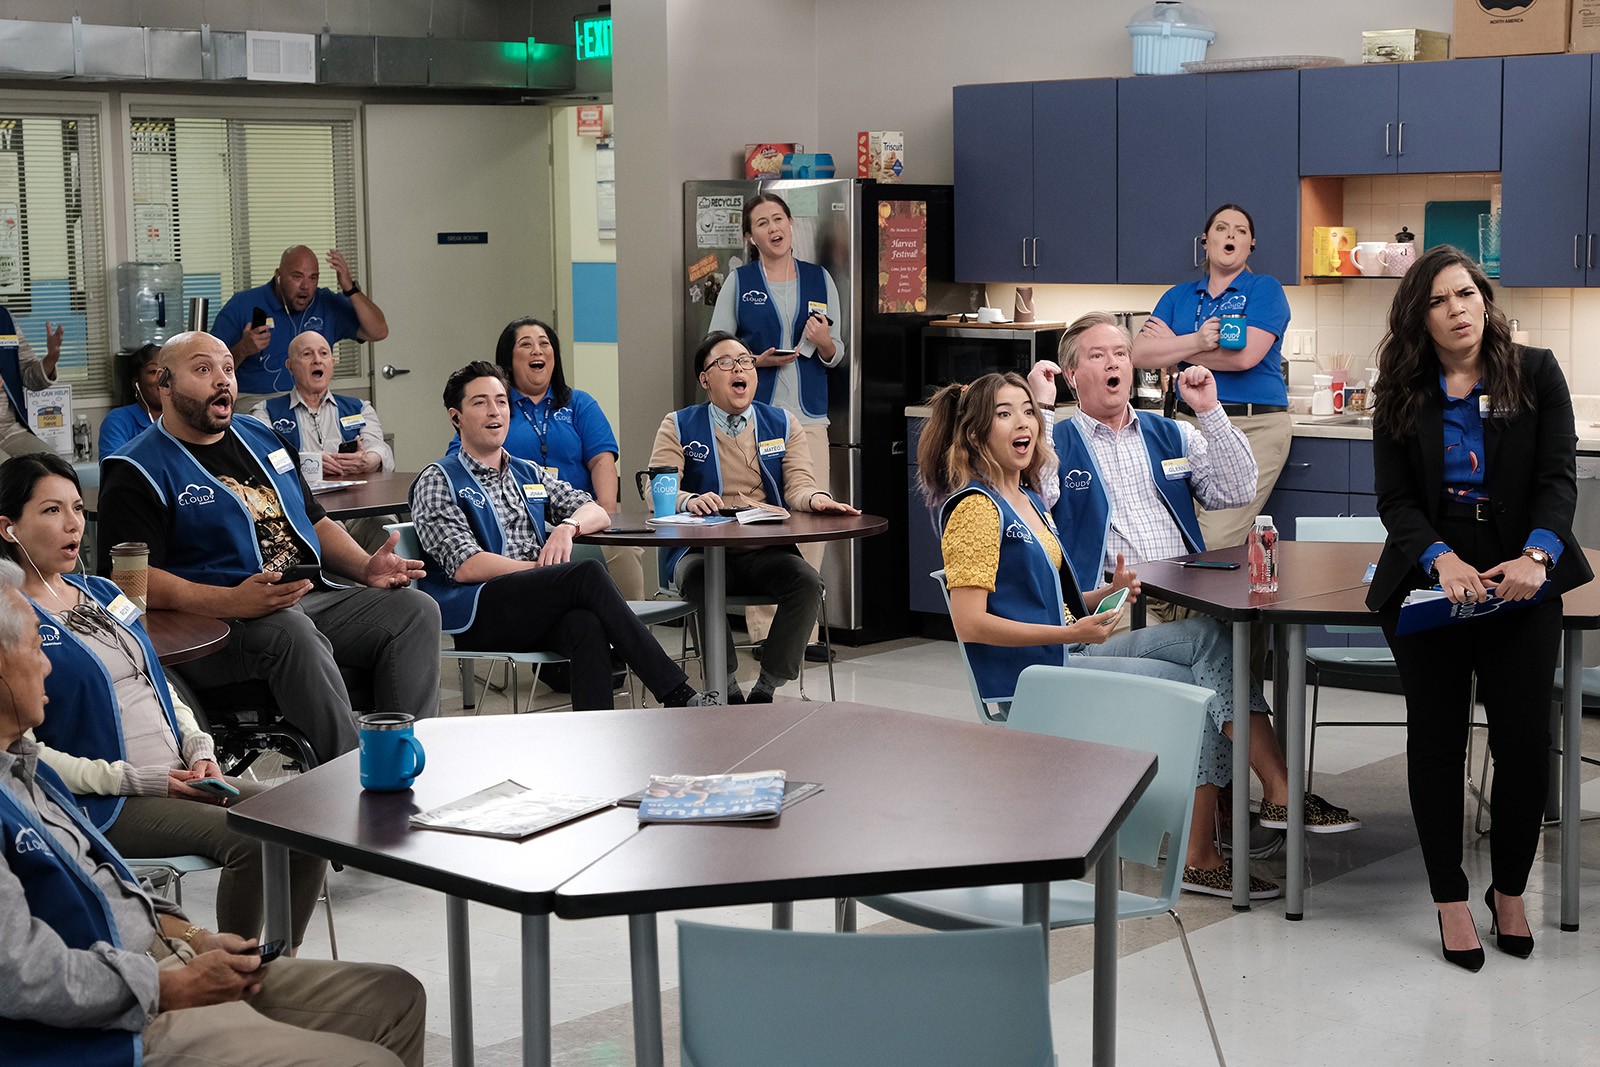 'Superstore' is finally shutting its doors after six seasons on NBC. See how the cast is reacting to the surprise cancellation.